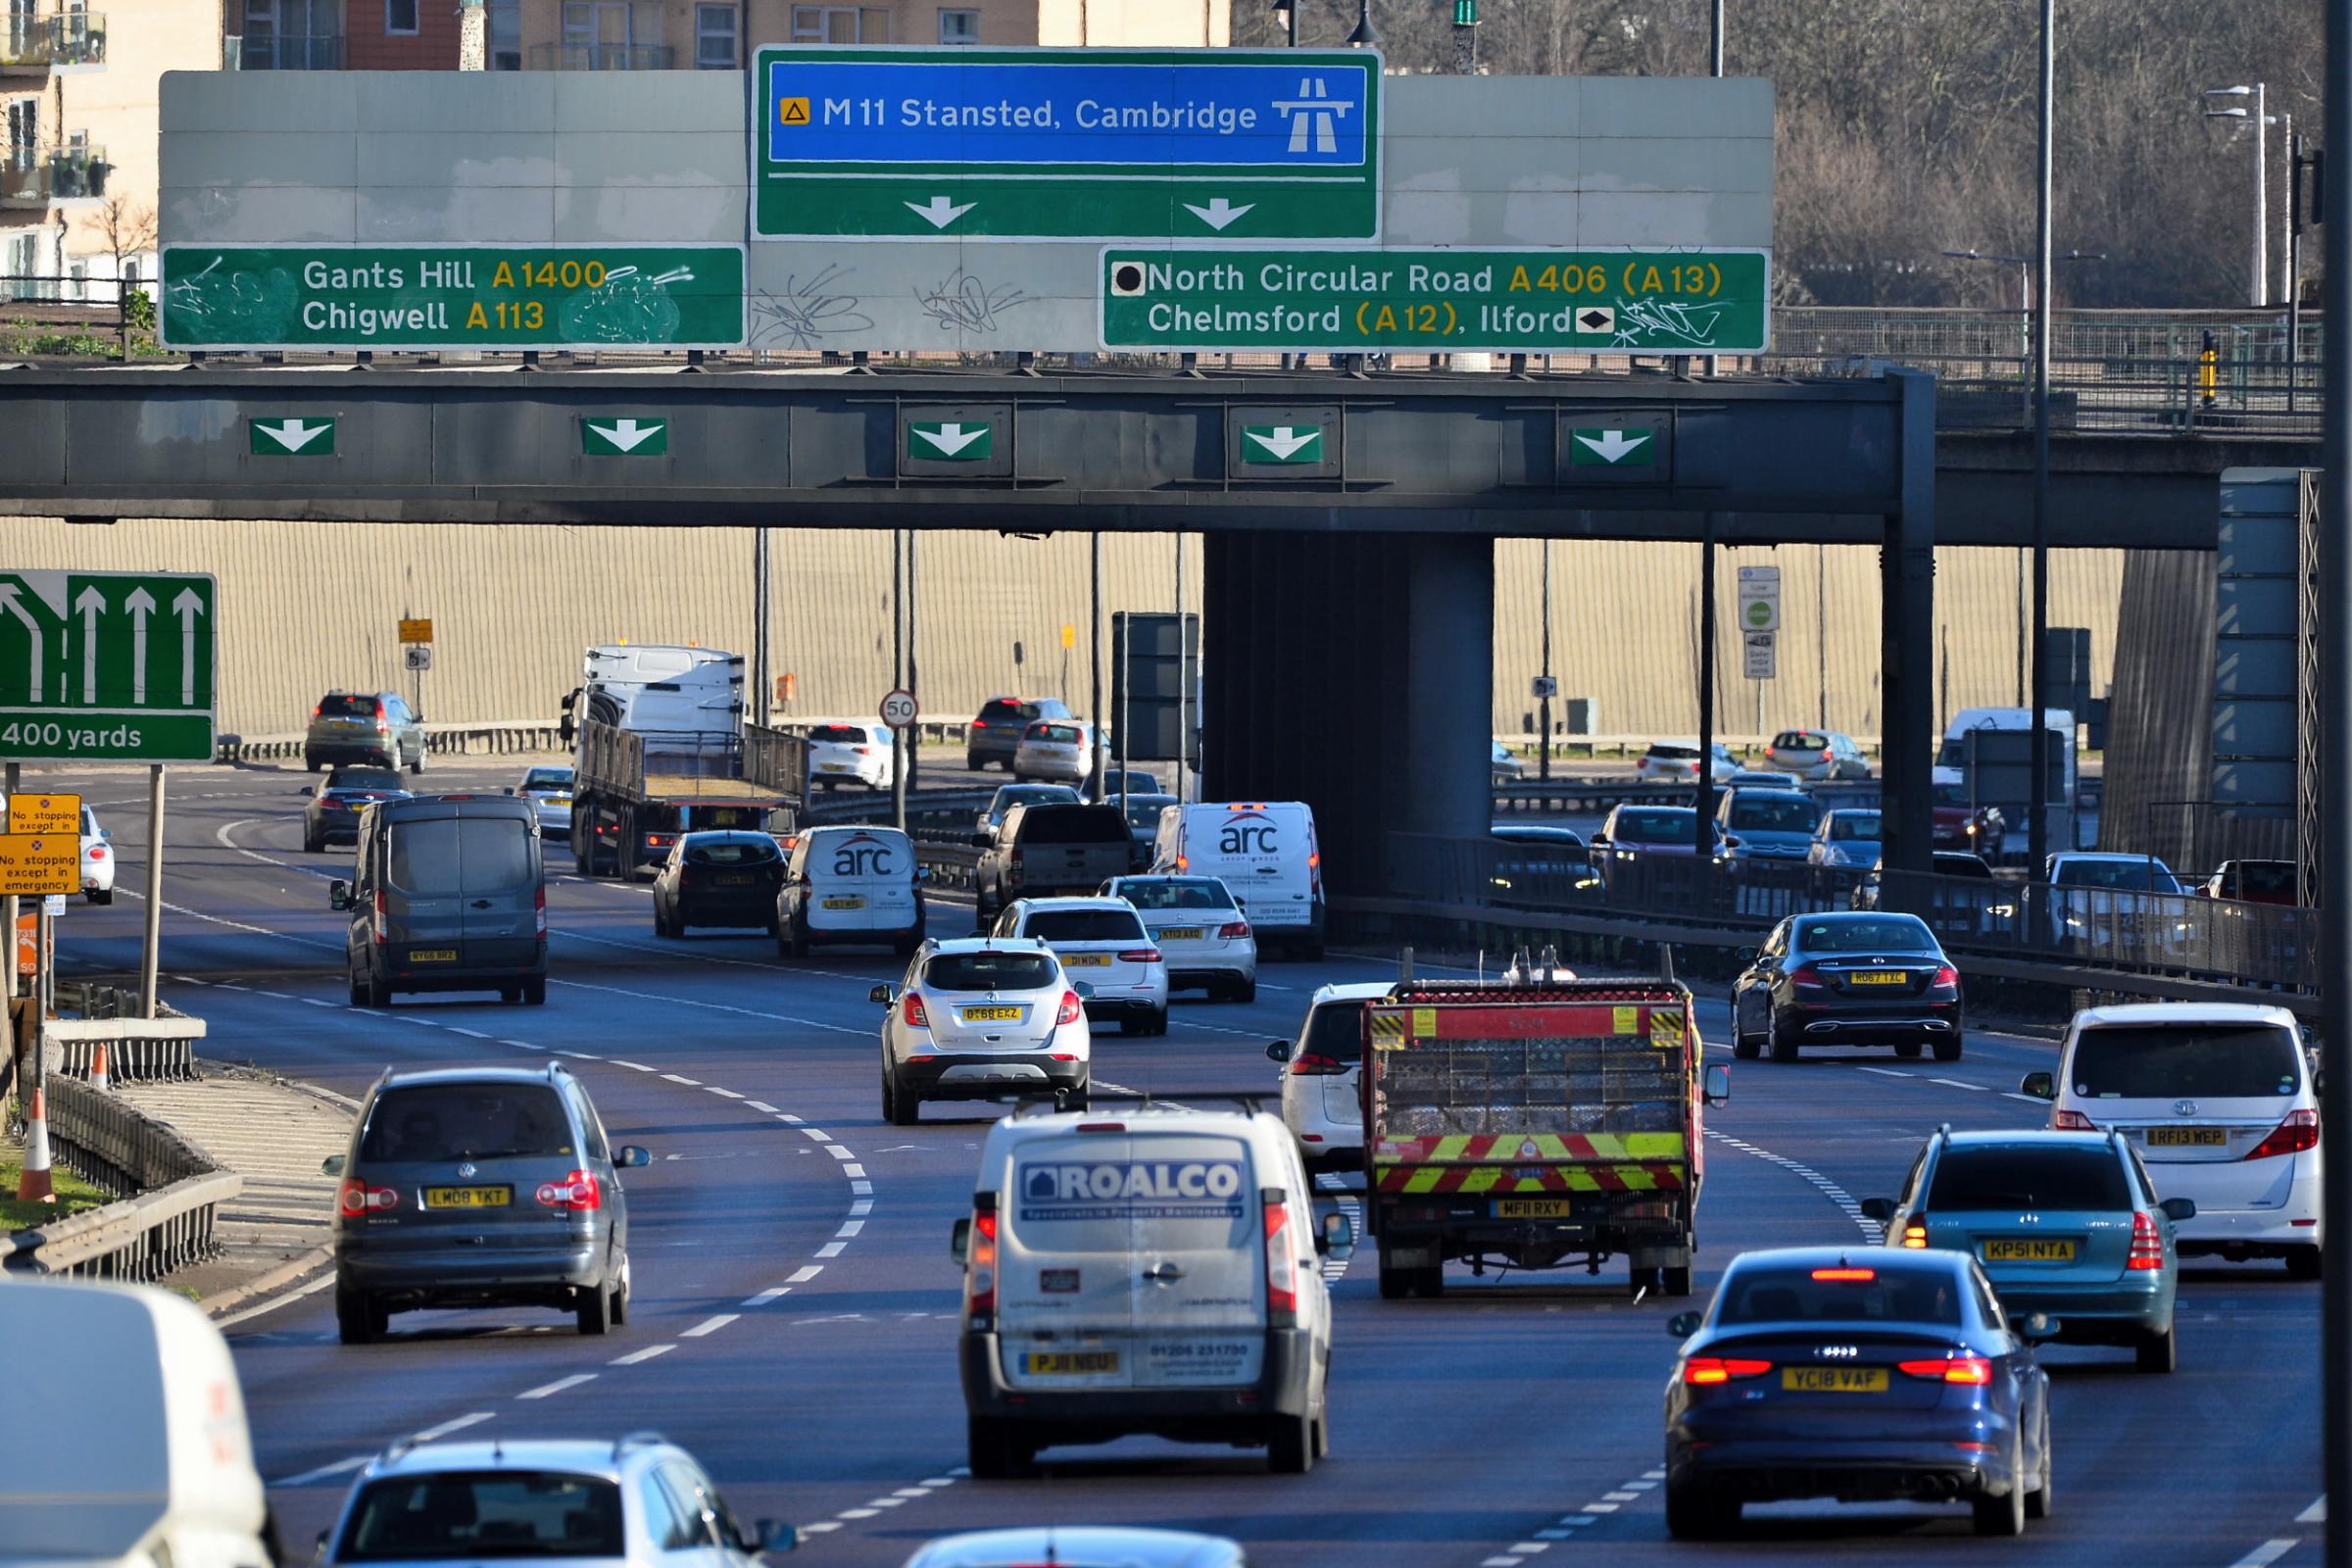 Traffic delays on the M25 causing travel issues